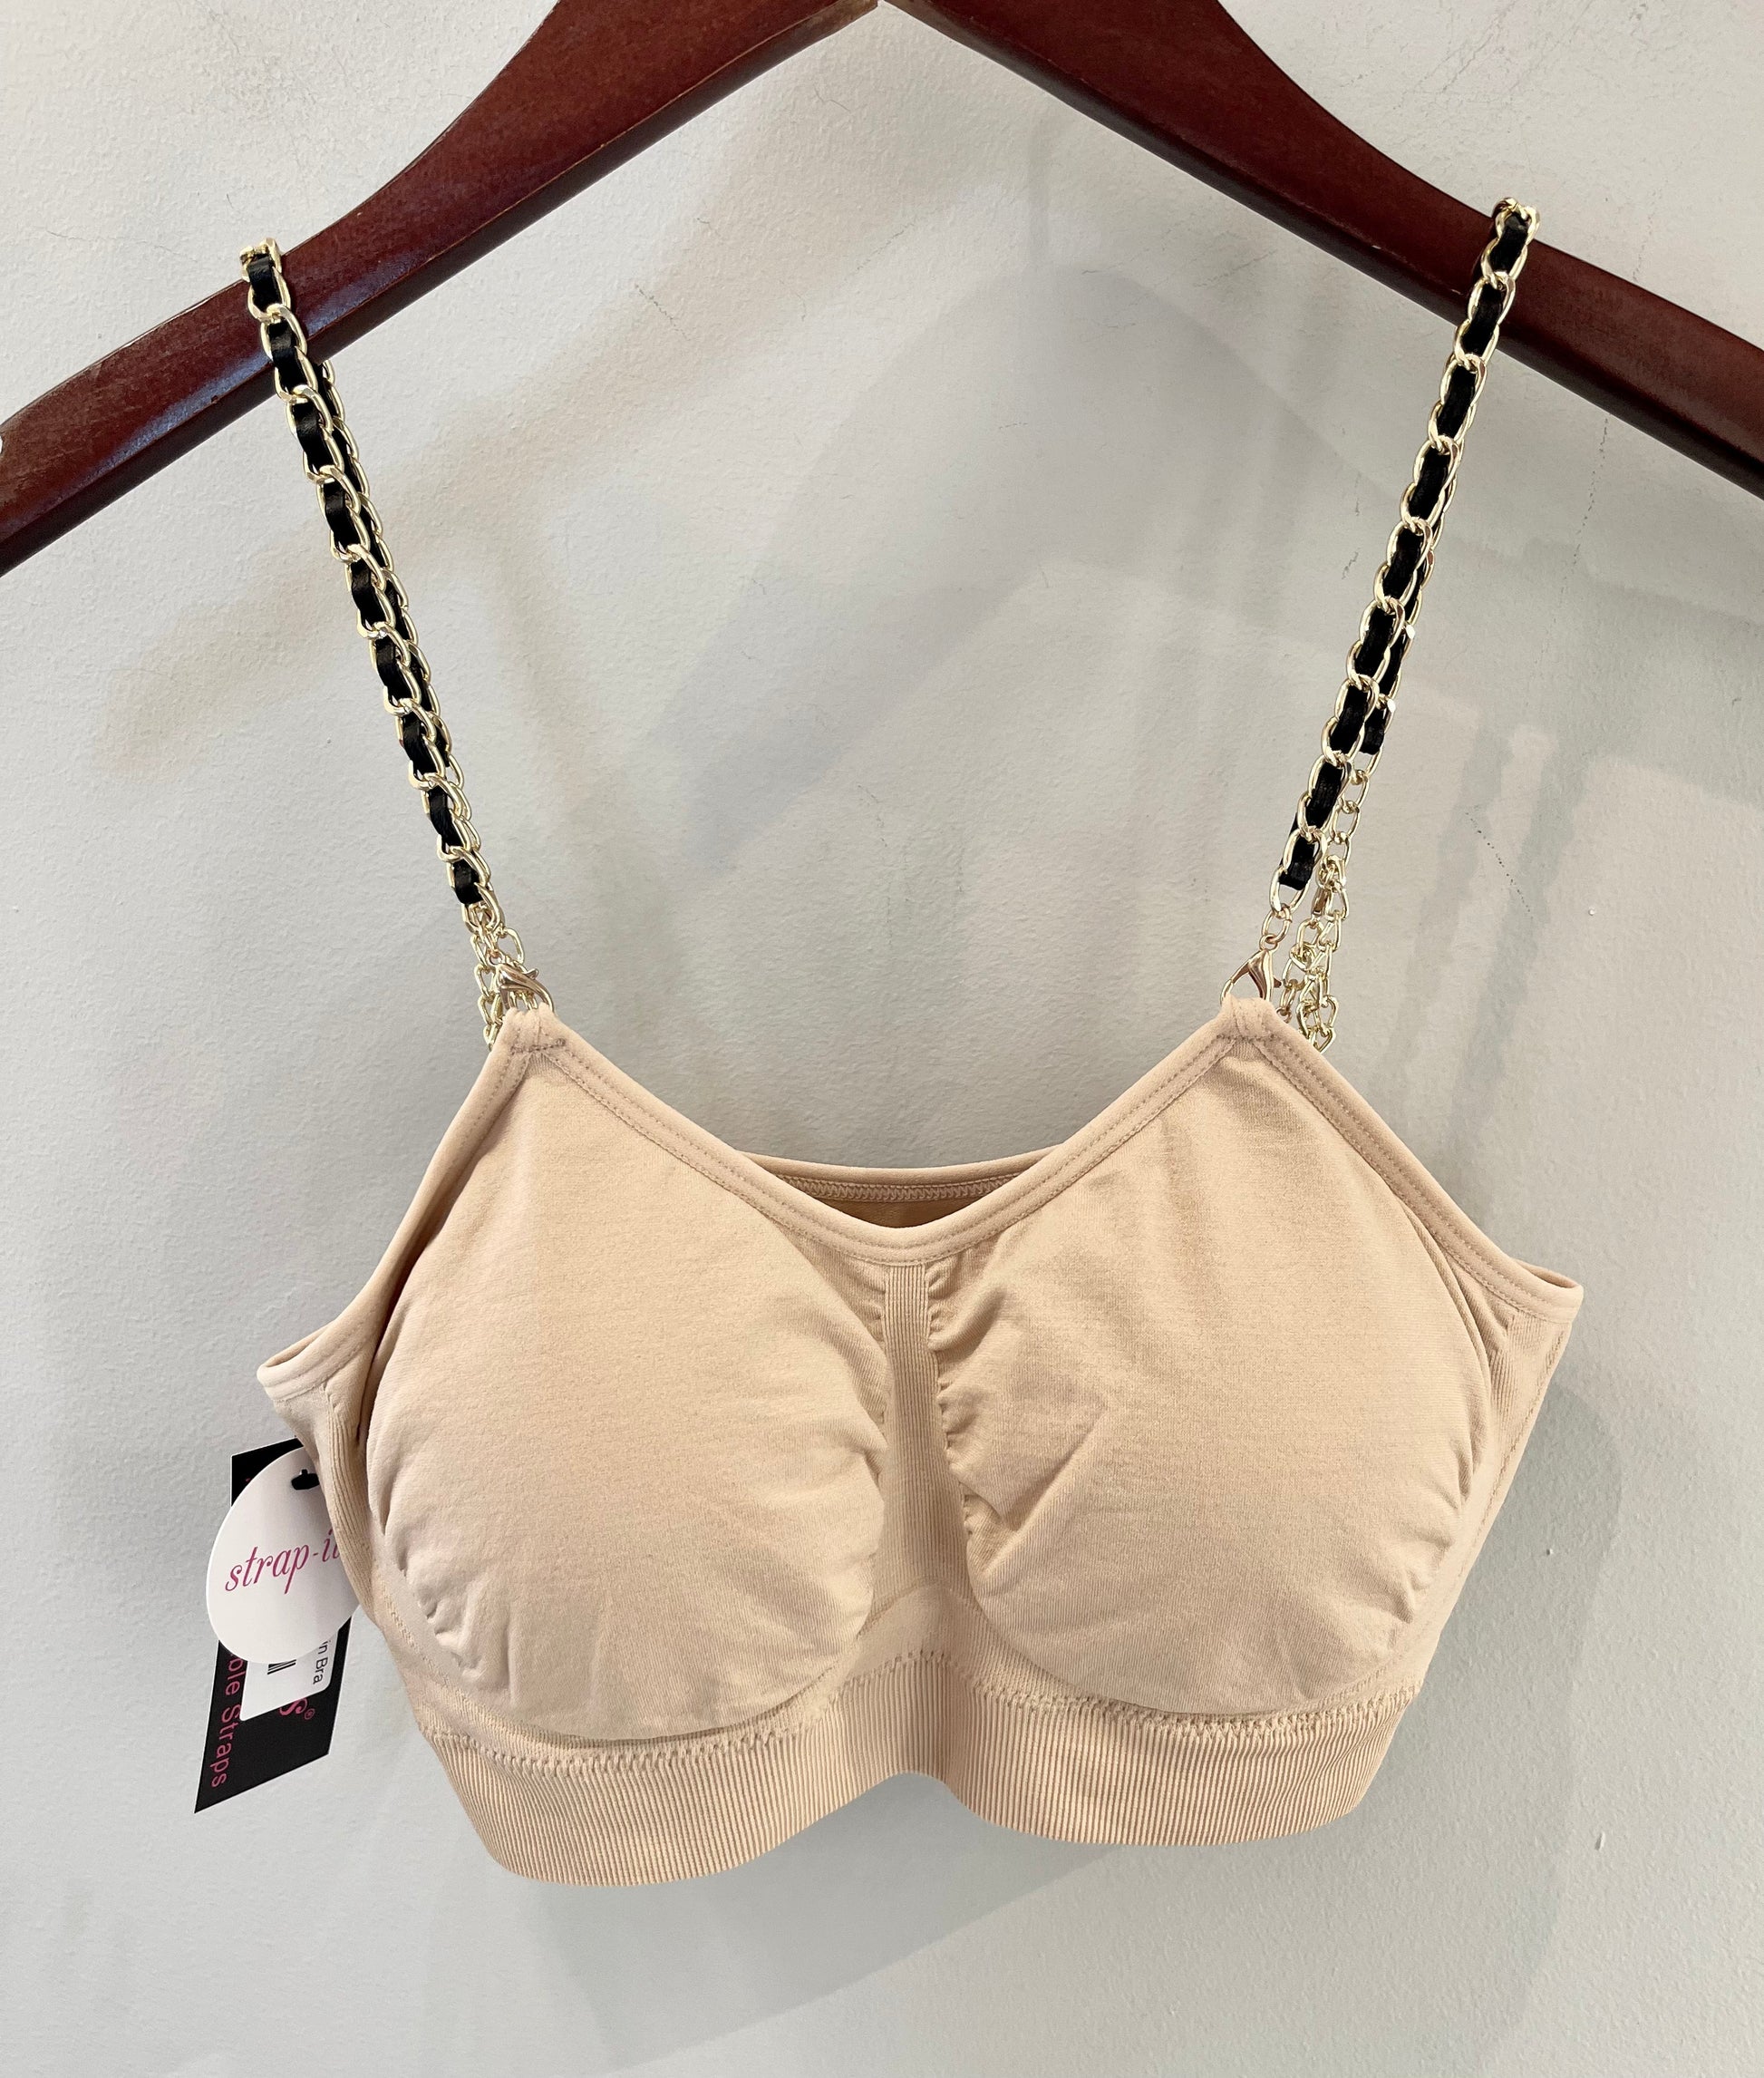 Slinky Gold Chain Bra at Leaf Boutique